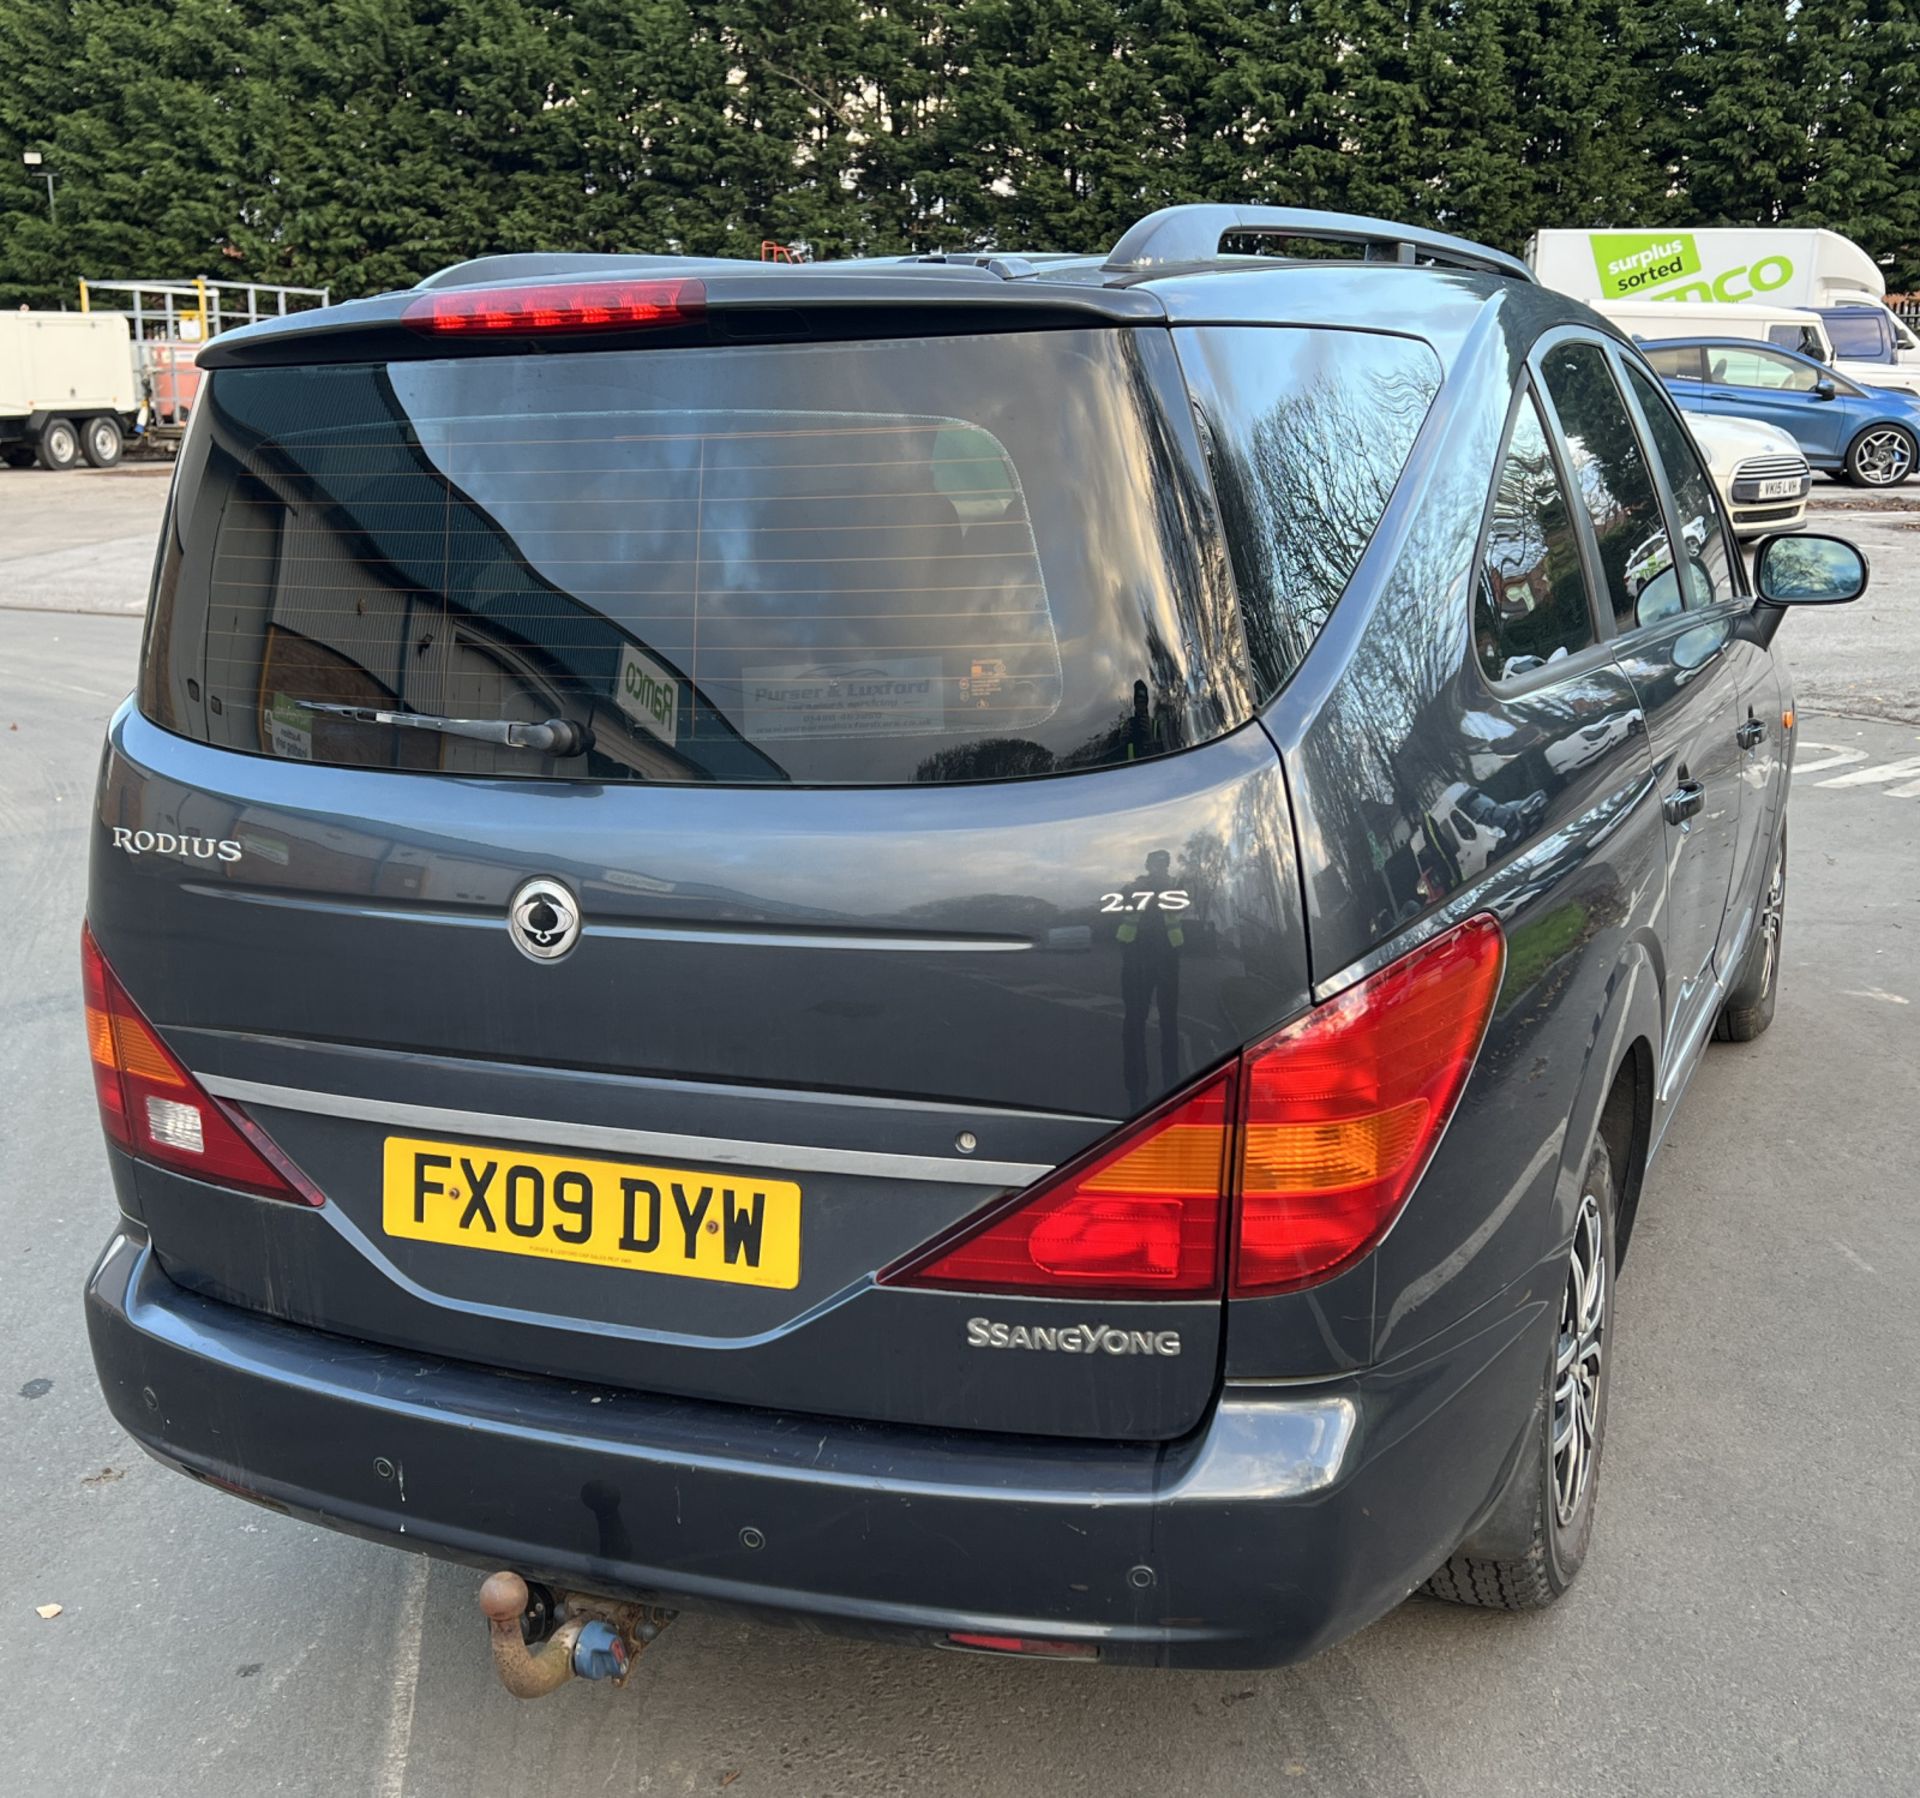 Ssangyong Rodius 7 seater - 2x key fobs - 2.7l Mercedes engine - see description - Image 5 of 30